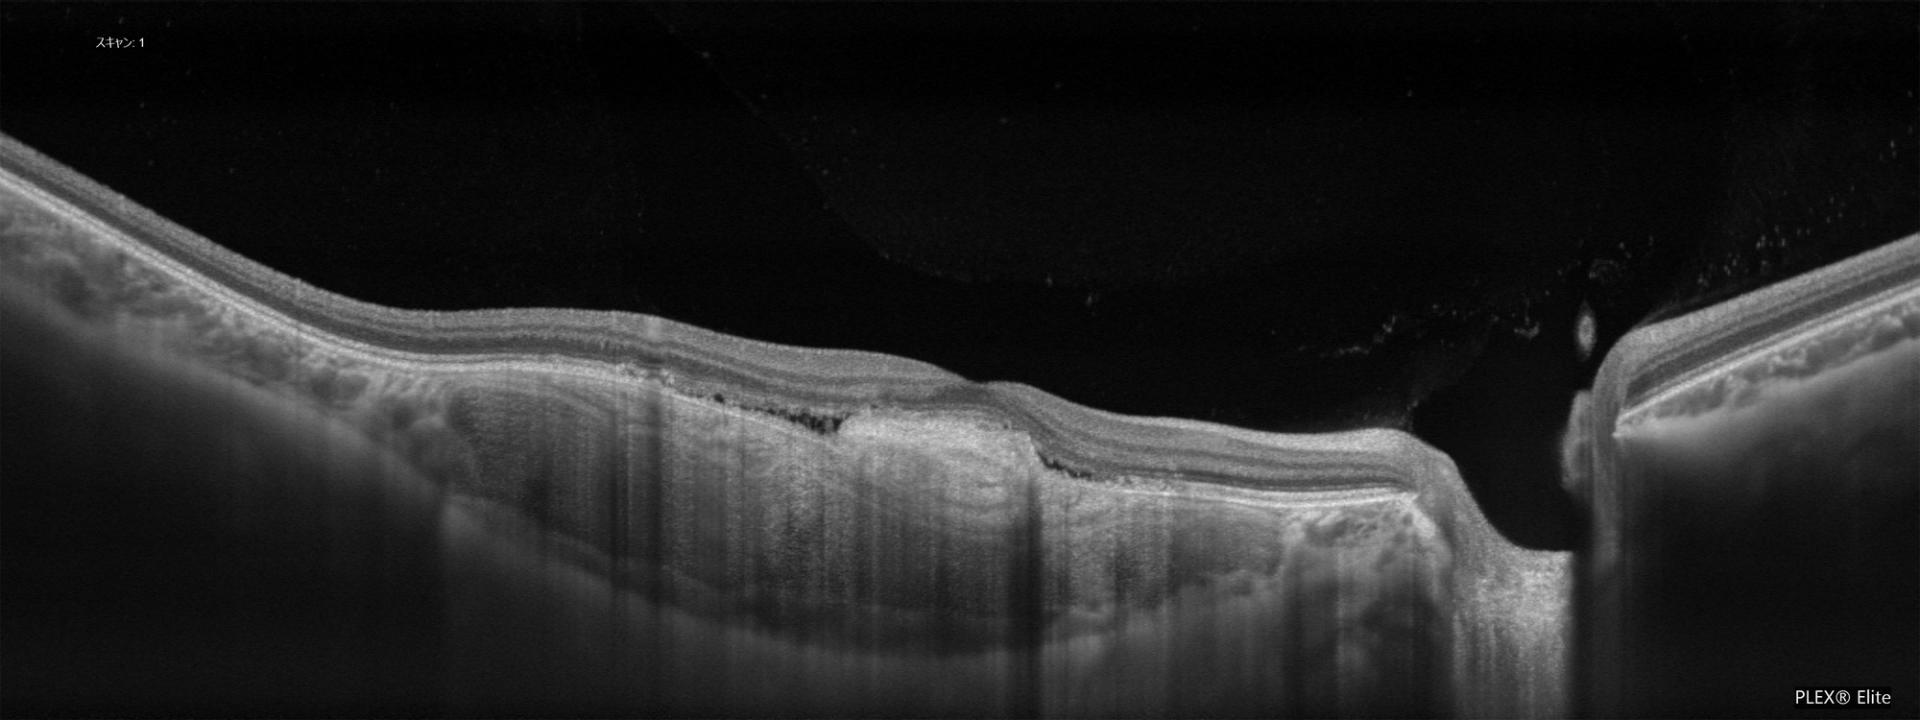 OCT image through the fovea. The tumor is located within the choroid, and the retina is compressed anteriorly